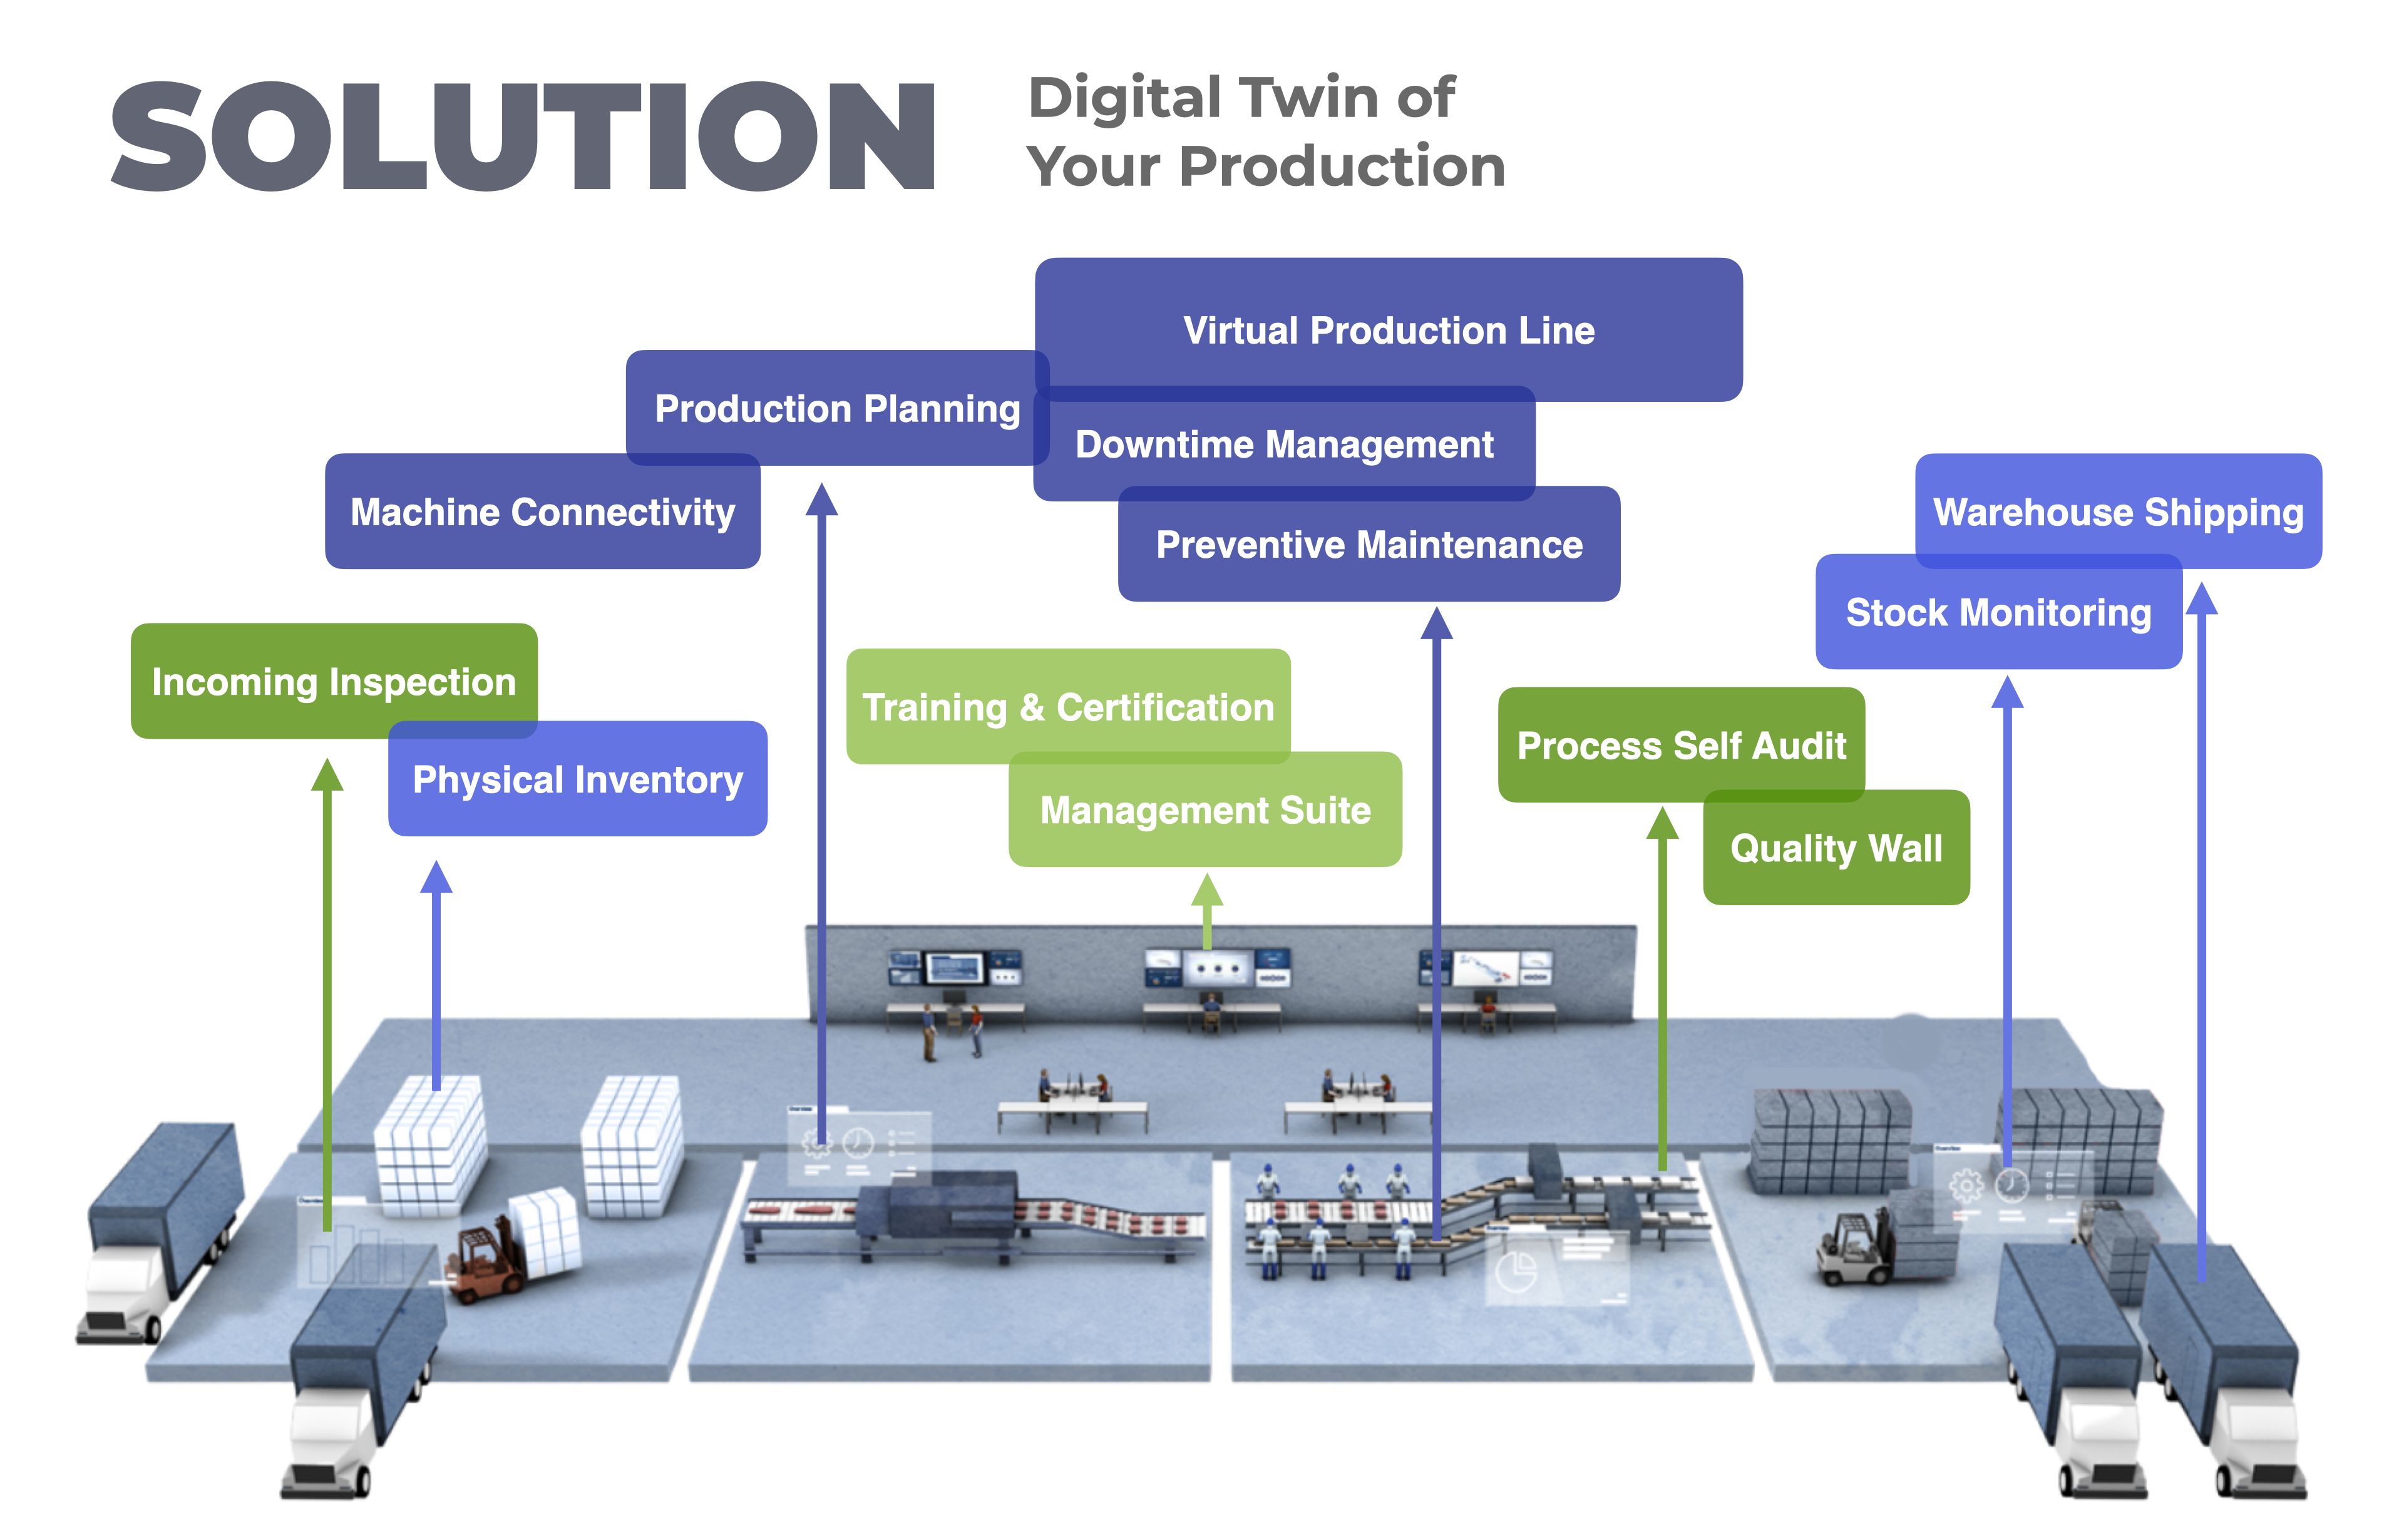 Digital Twin Mirroring Your Production